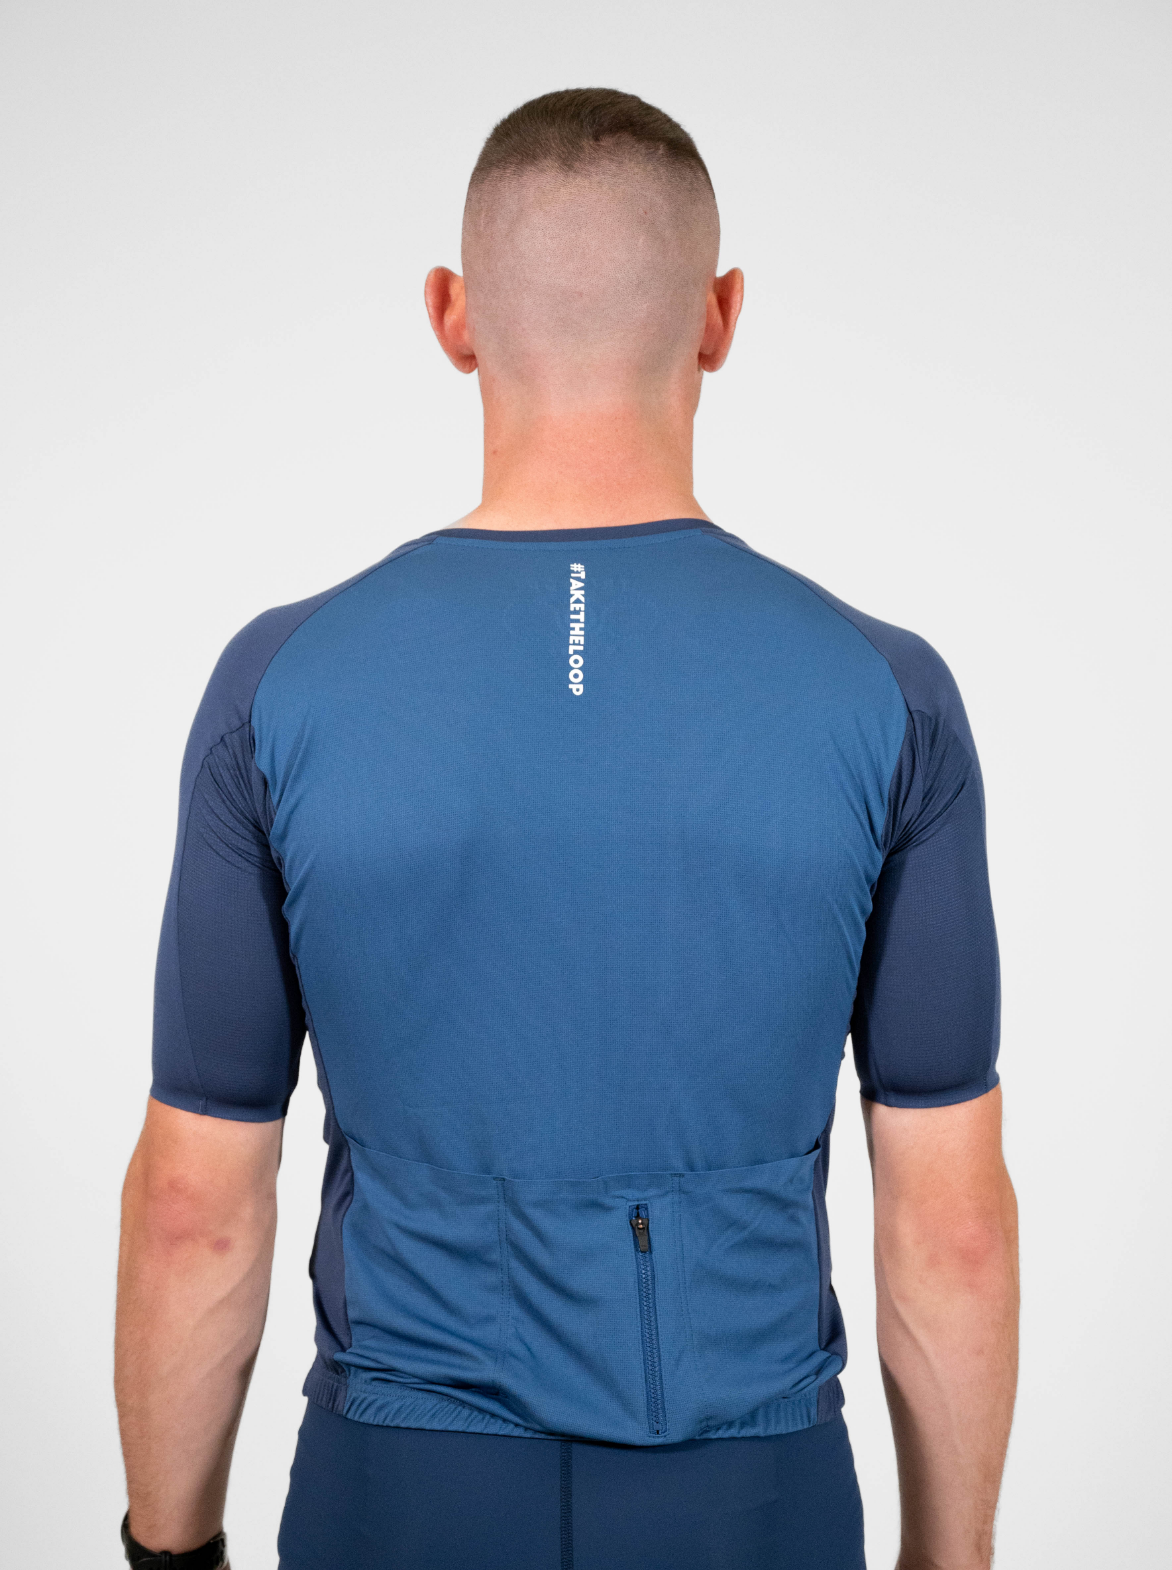 Men's cycling jersey Made in Italy and Recycled — TOULON